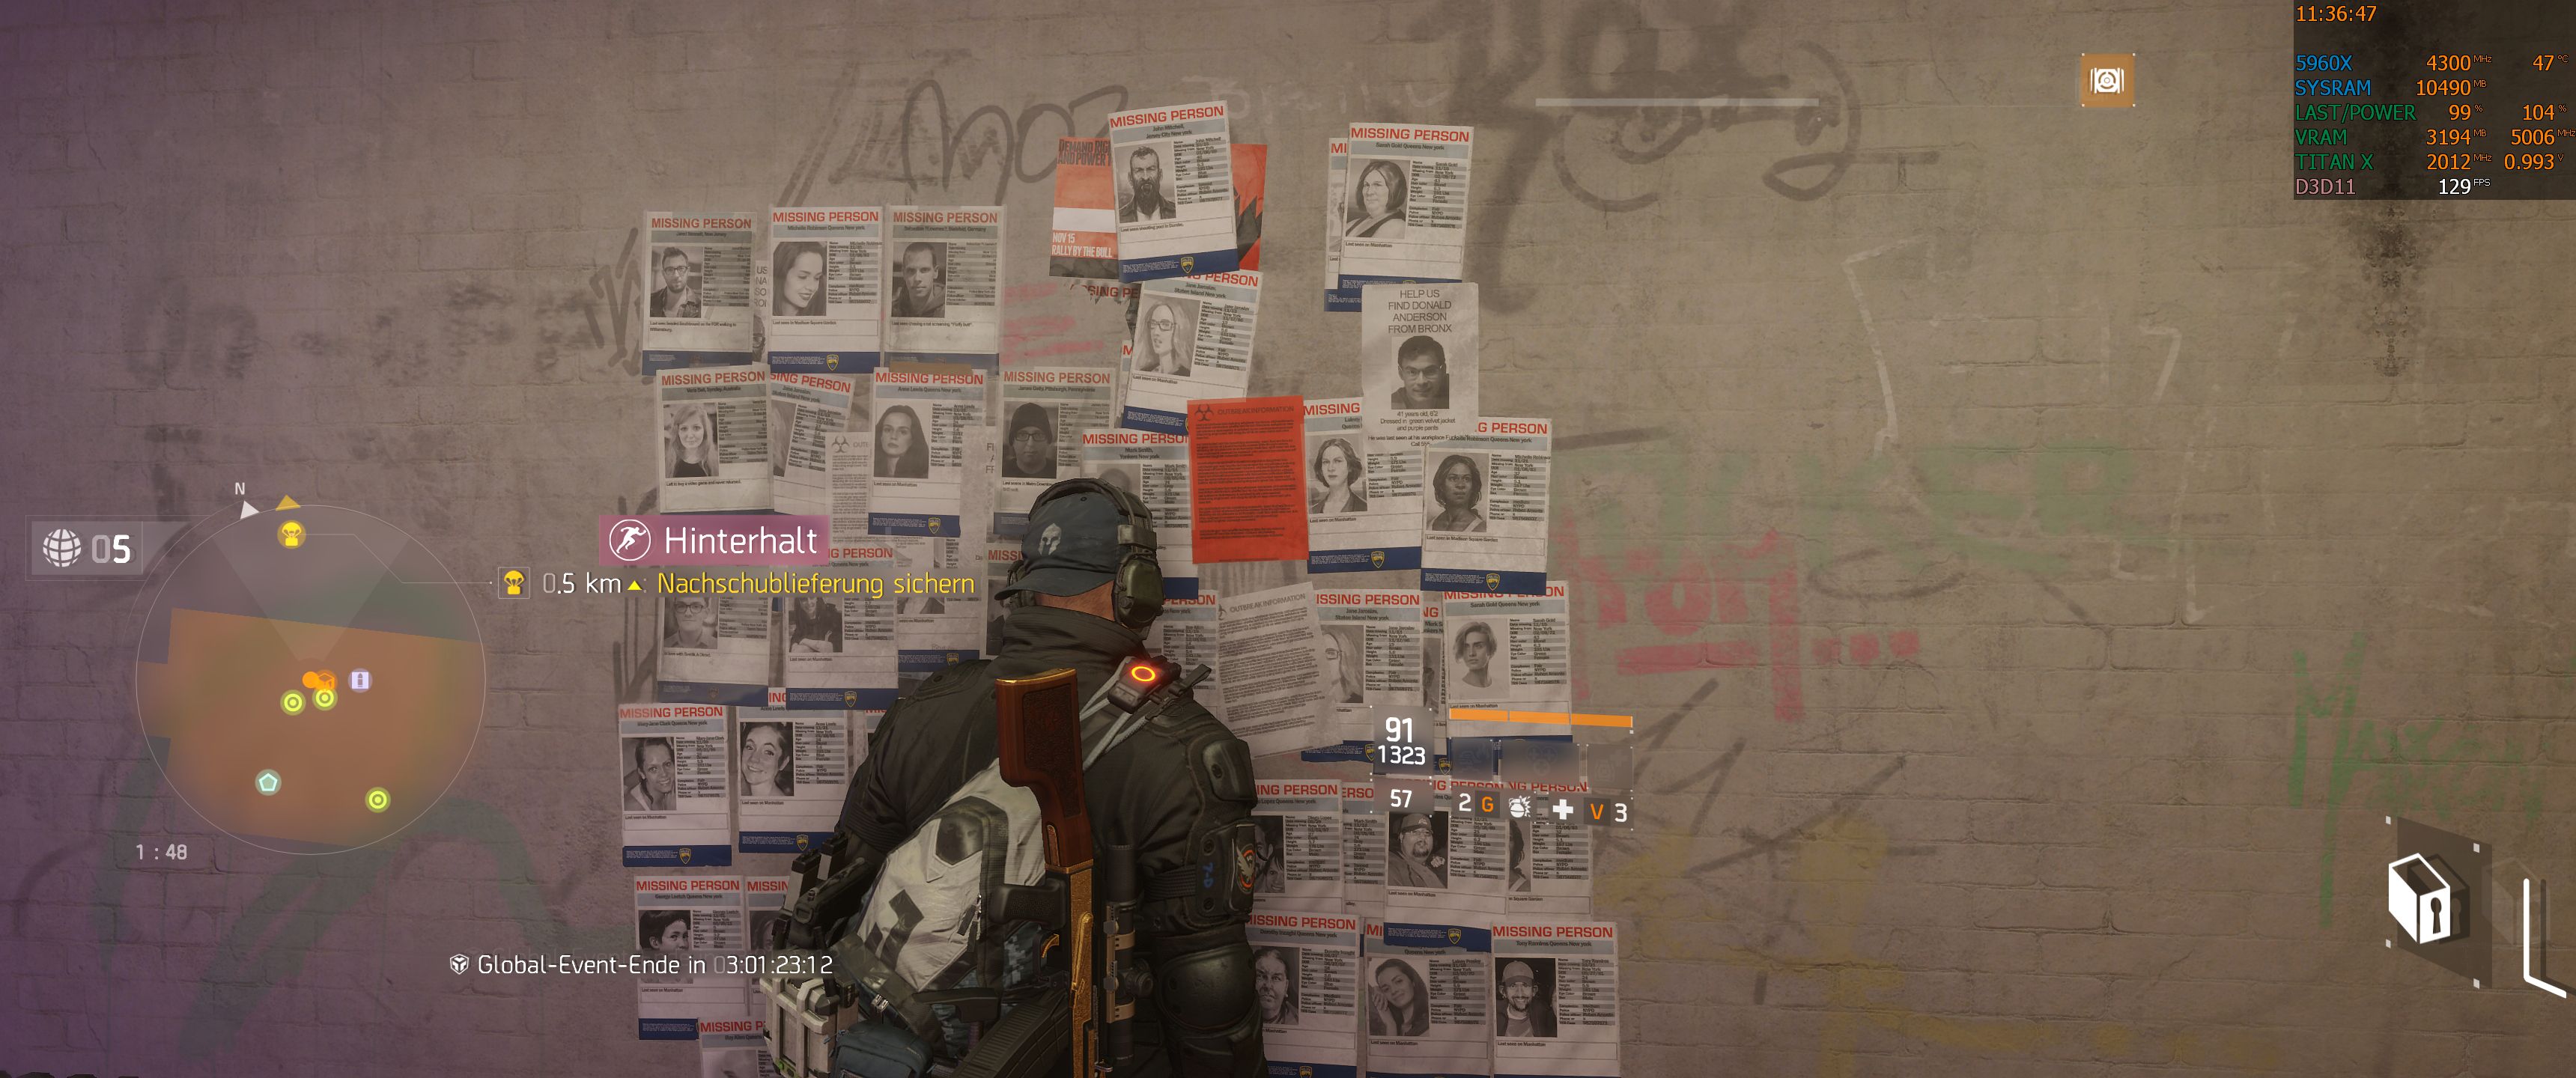 thedivision_2018_01_2uoskq.jpg